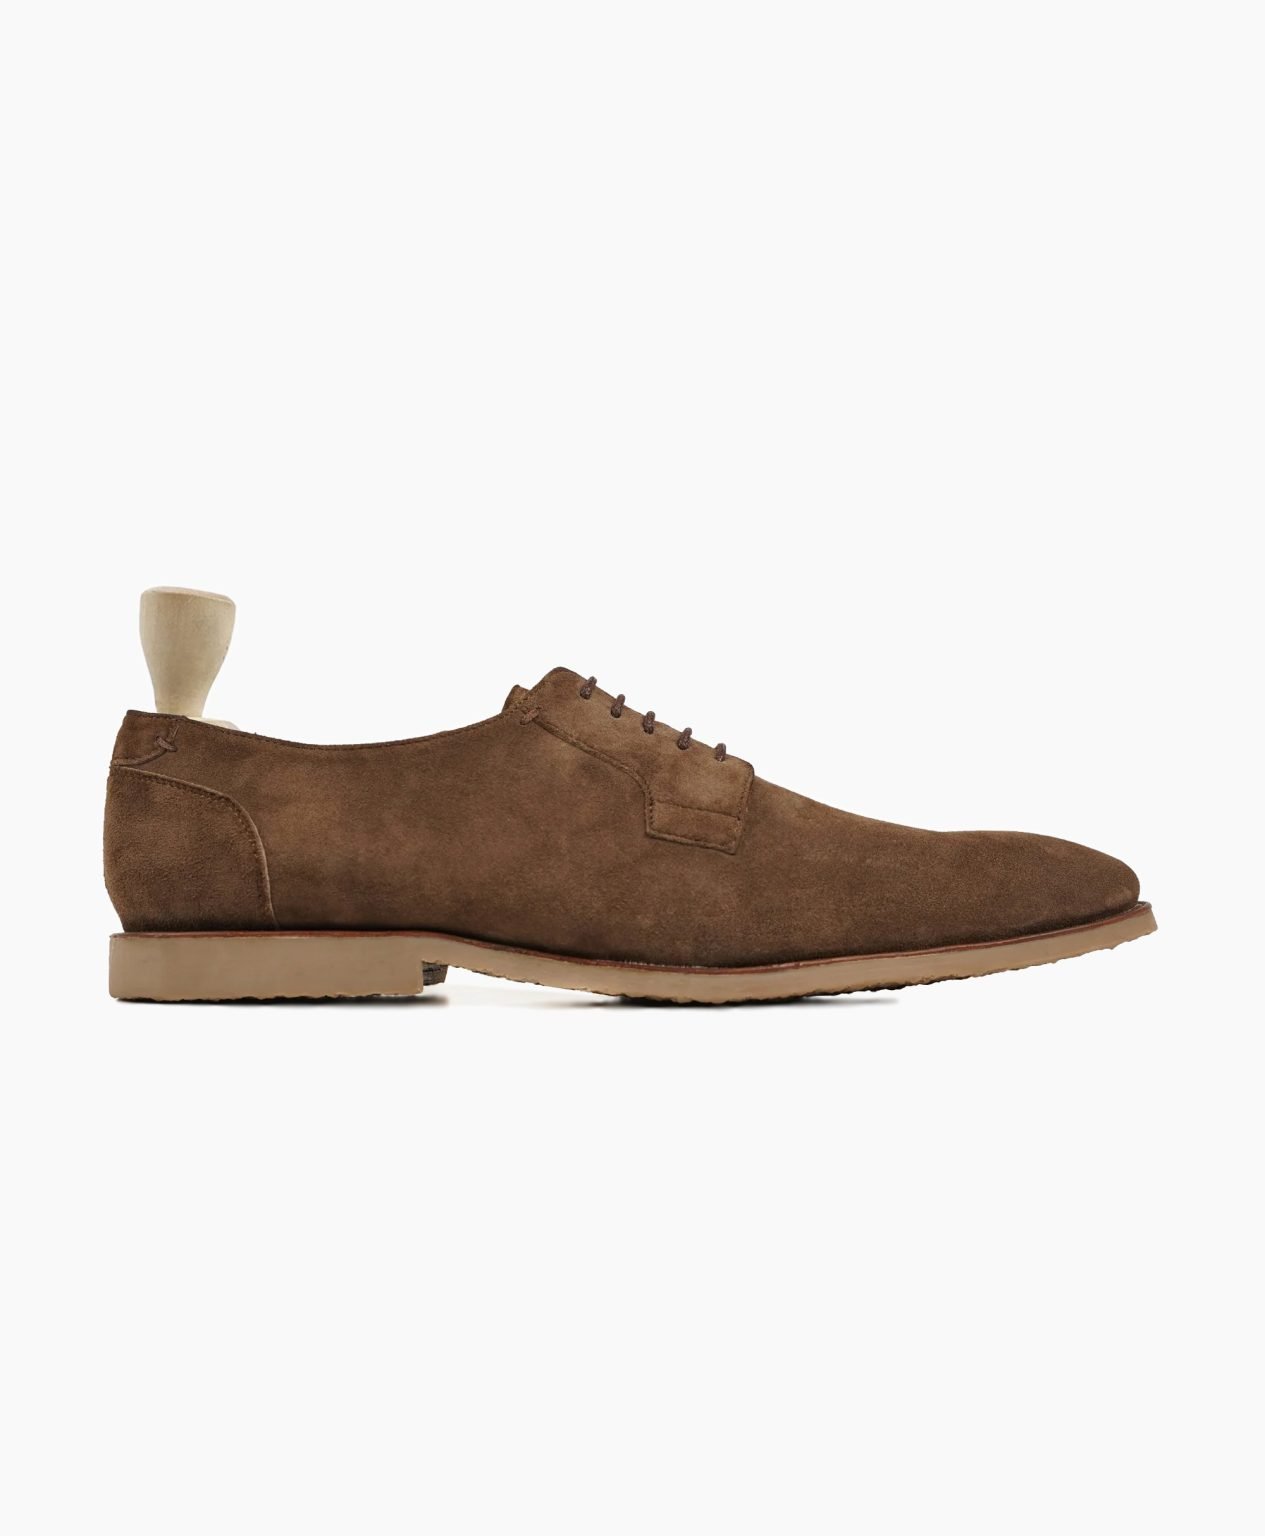 bolsover-derby-brown-suede-leather-shoes-image201